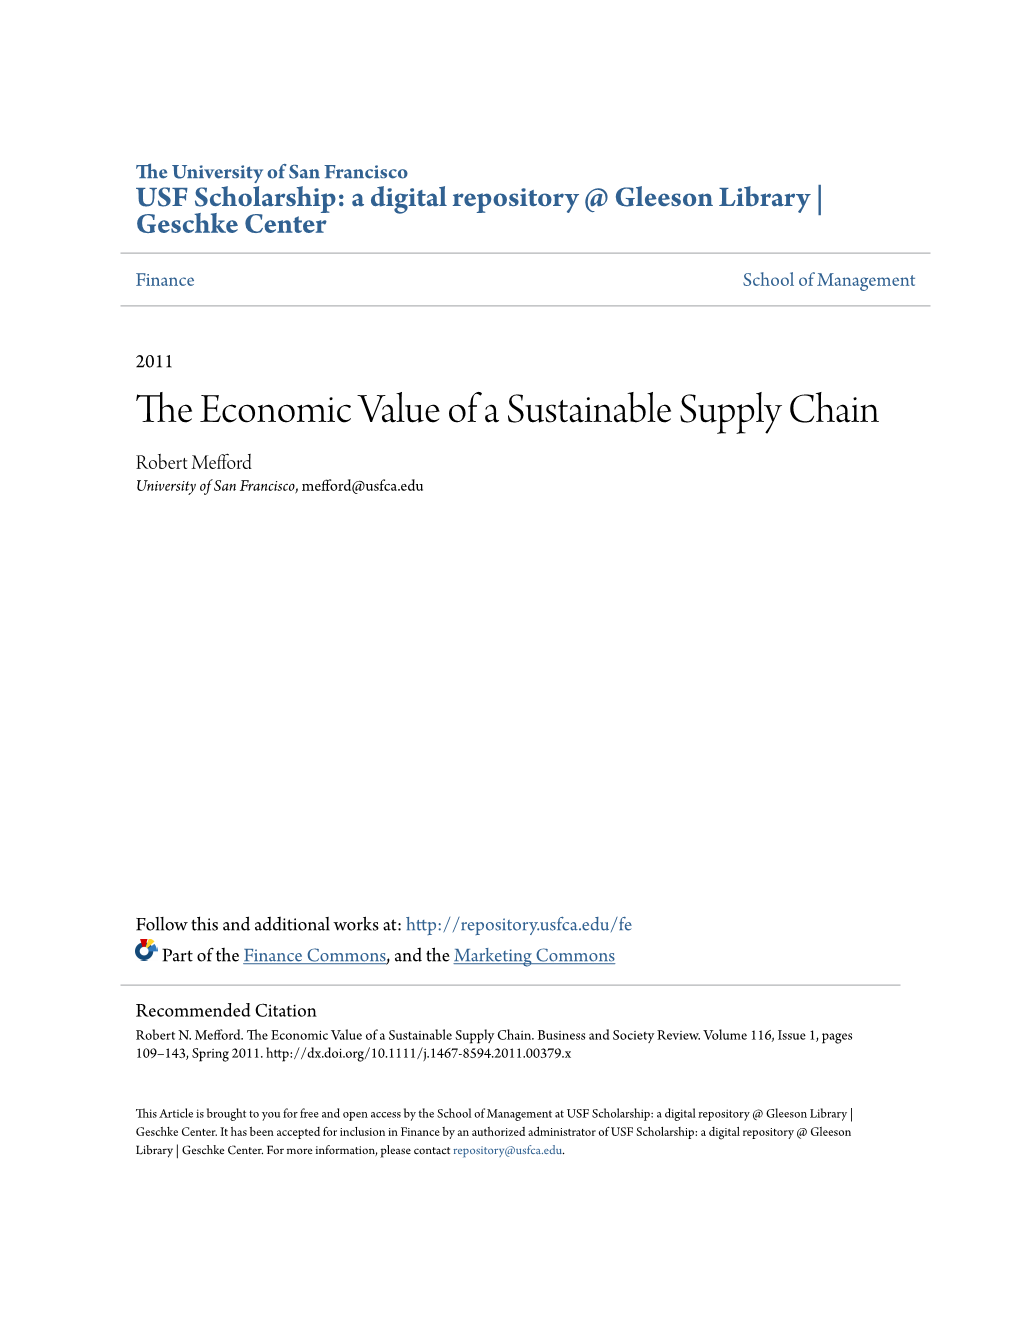 The Economic Value of a Sustainable Supply Chain